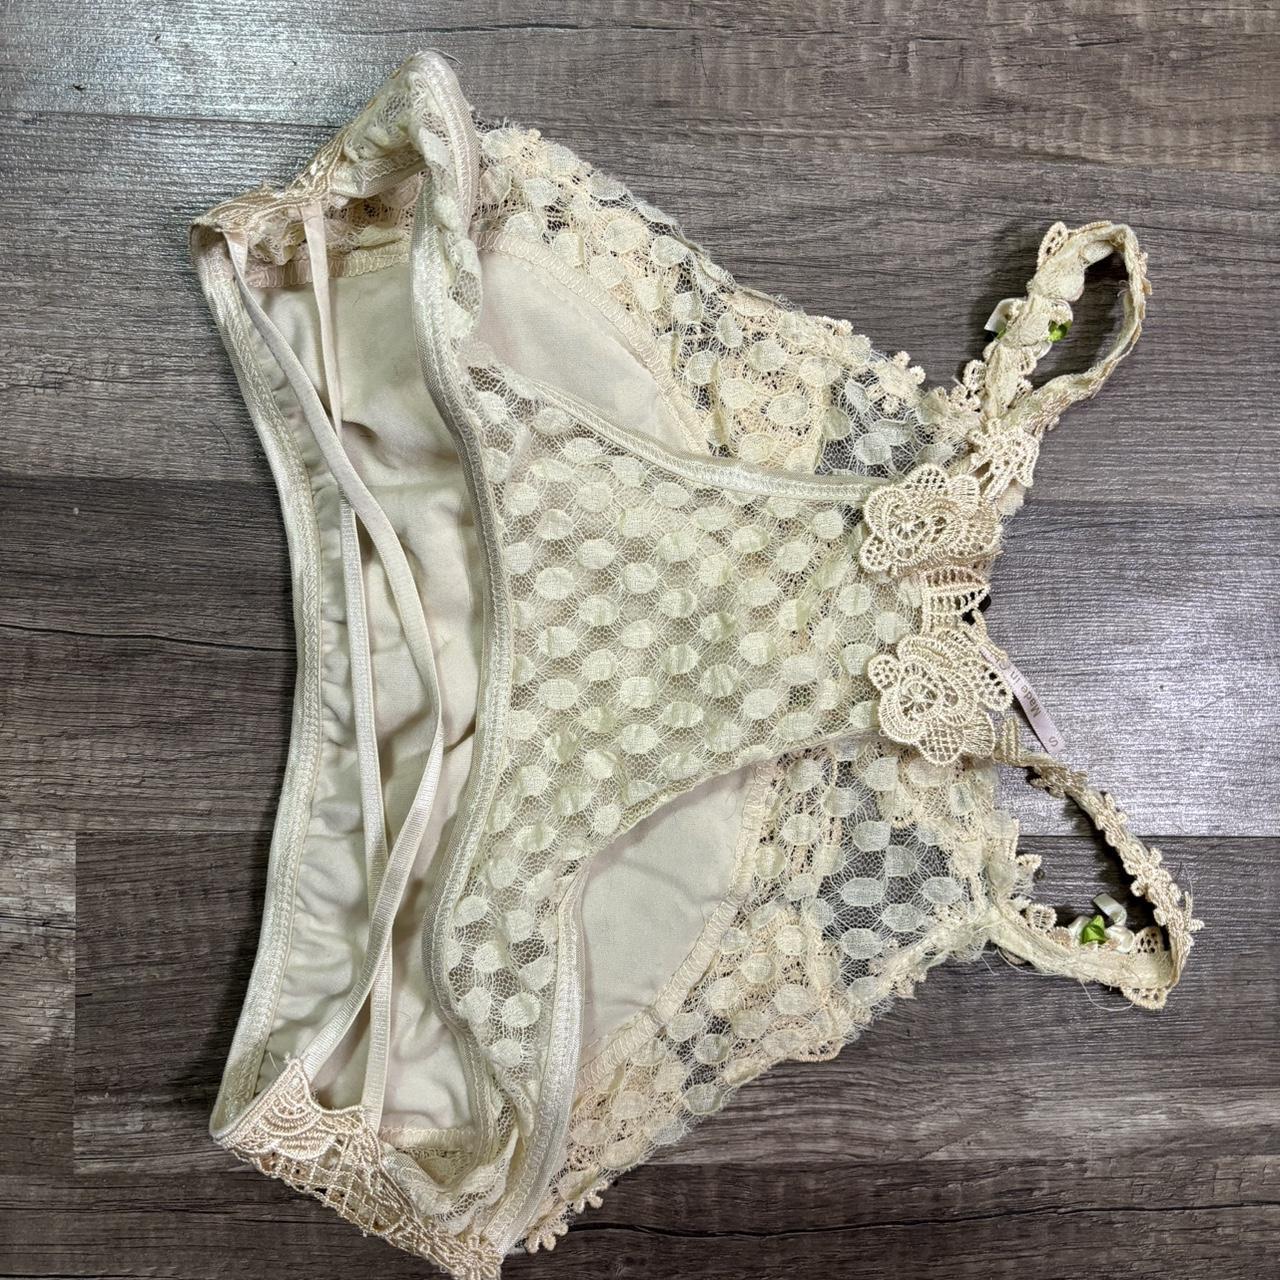  Other Stories lingerie in beige